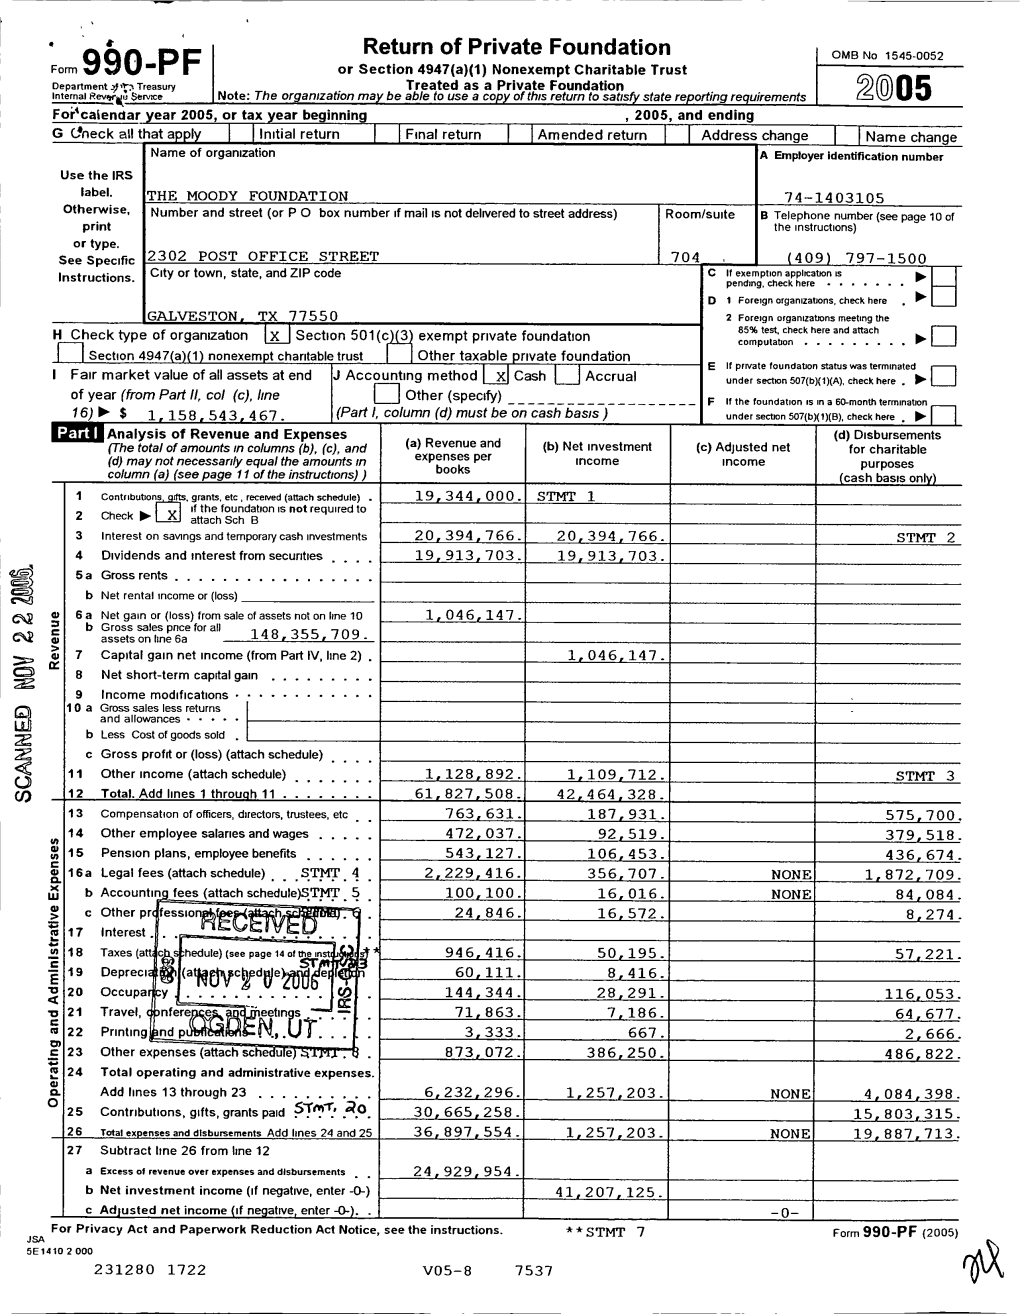 Form 990-PF Or Section 4947(A)(1) Nonexempt Charitable Trust Department -+^?